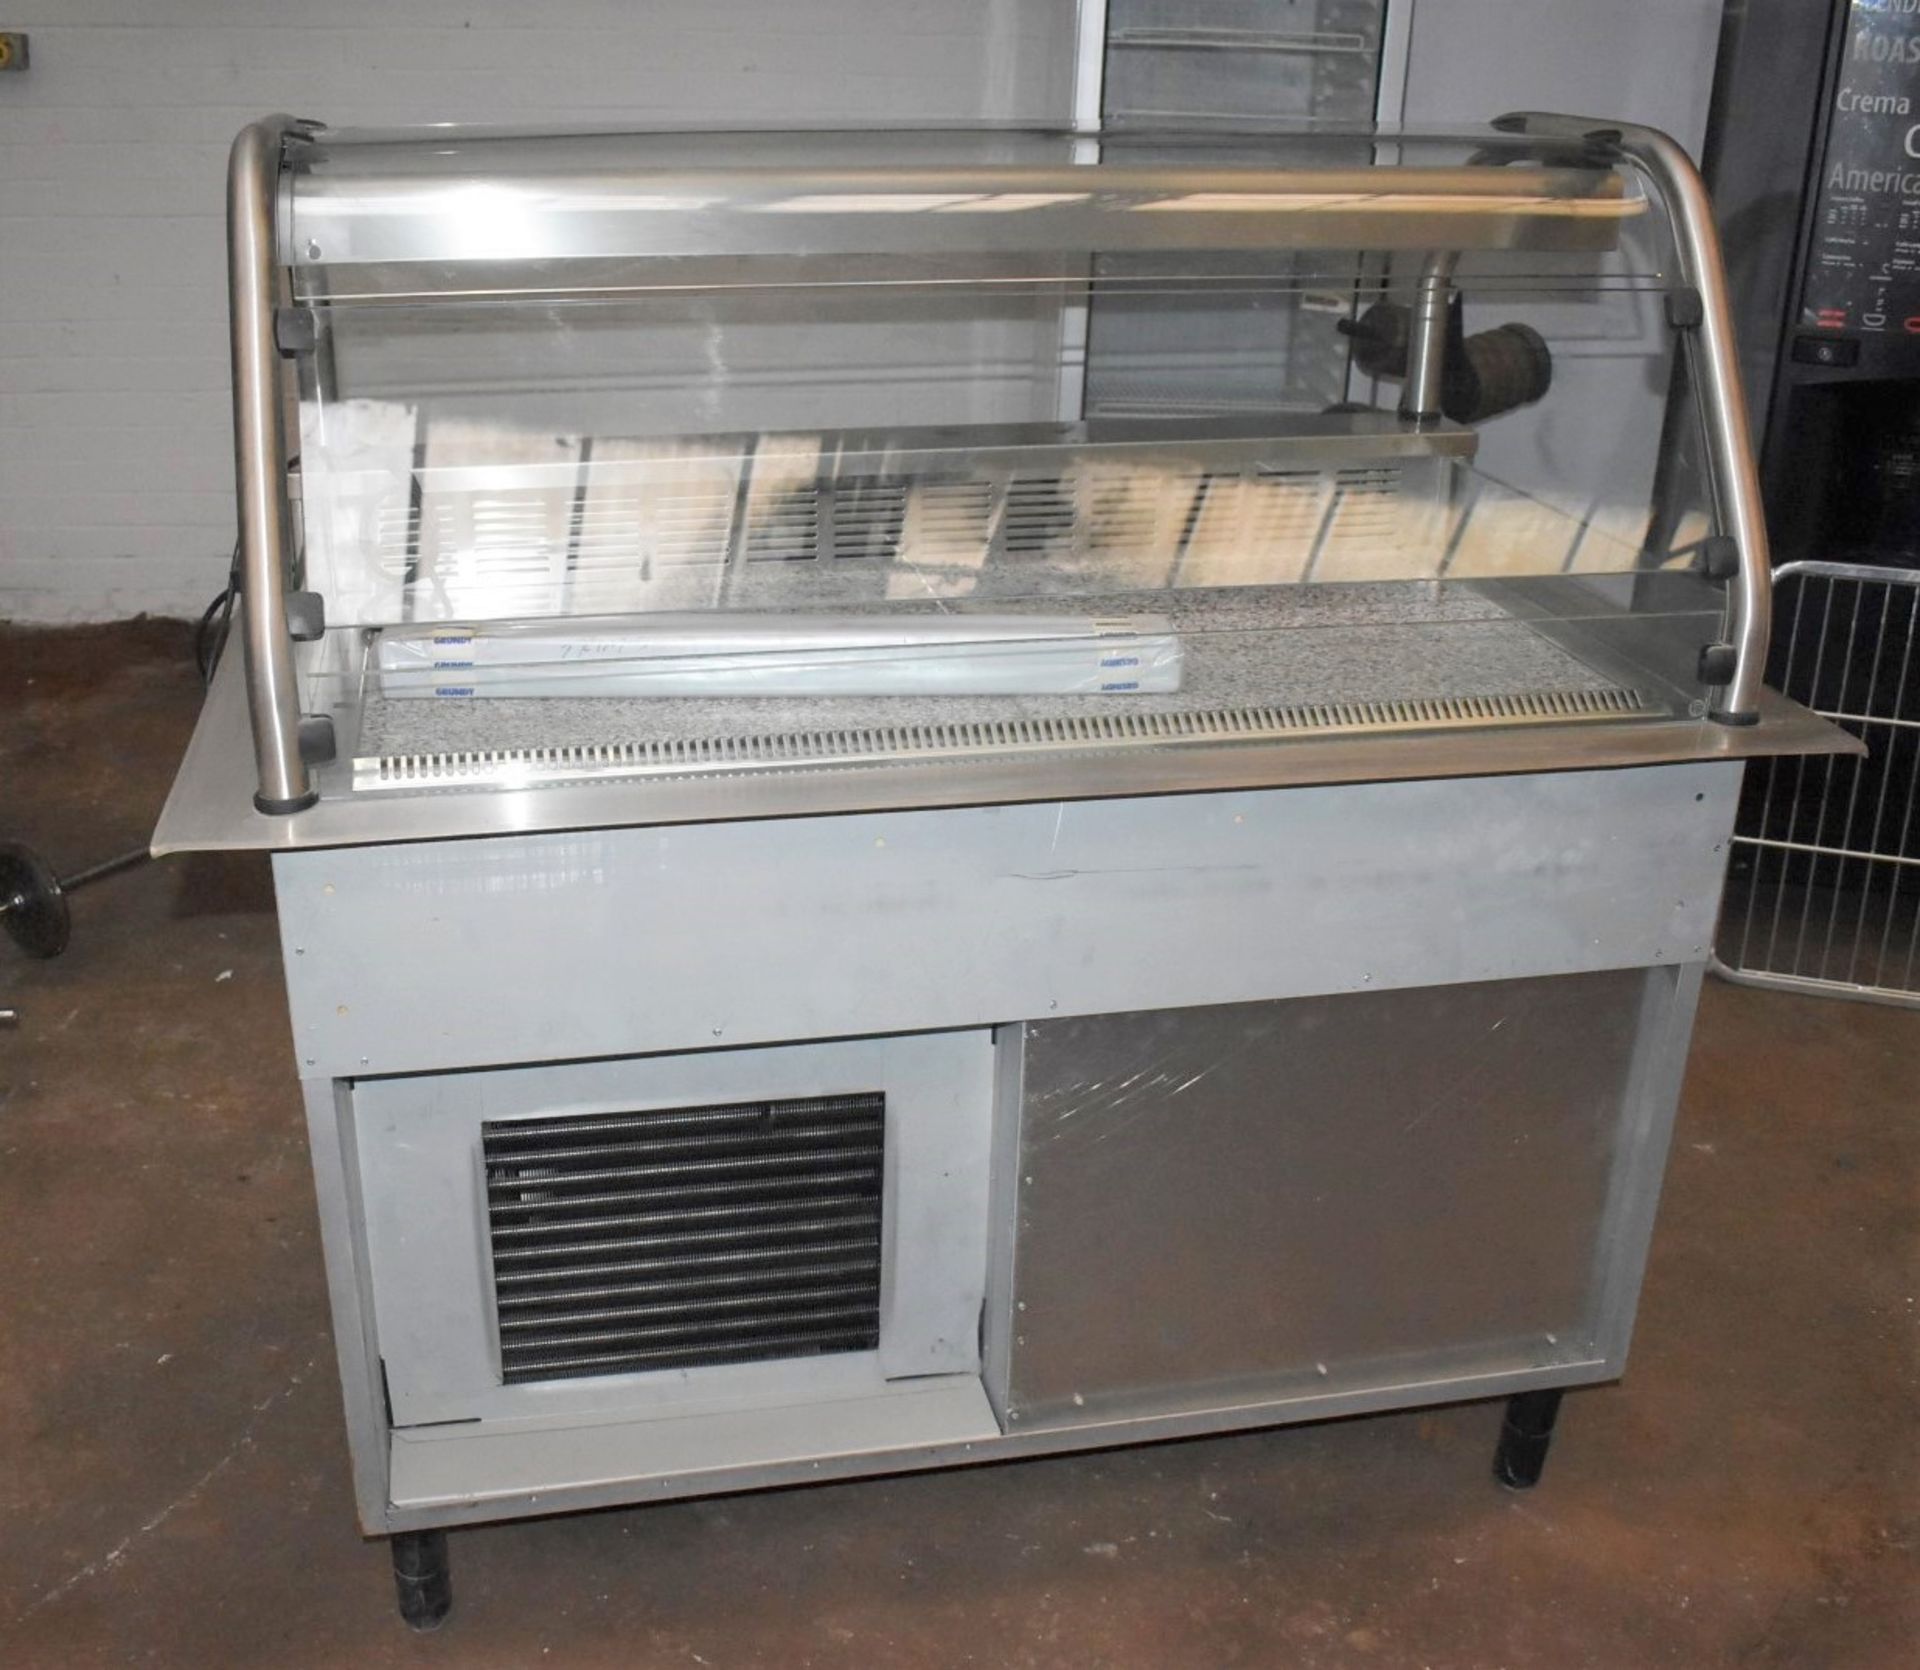 1 x Grundy Commercial Refrigerated Servery Unit With Stone Internal Panels - Stainless Steel - Image 2 of 14